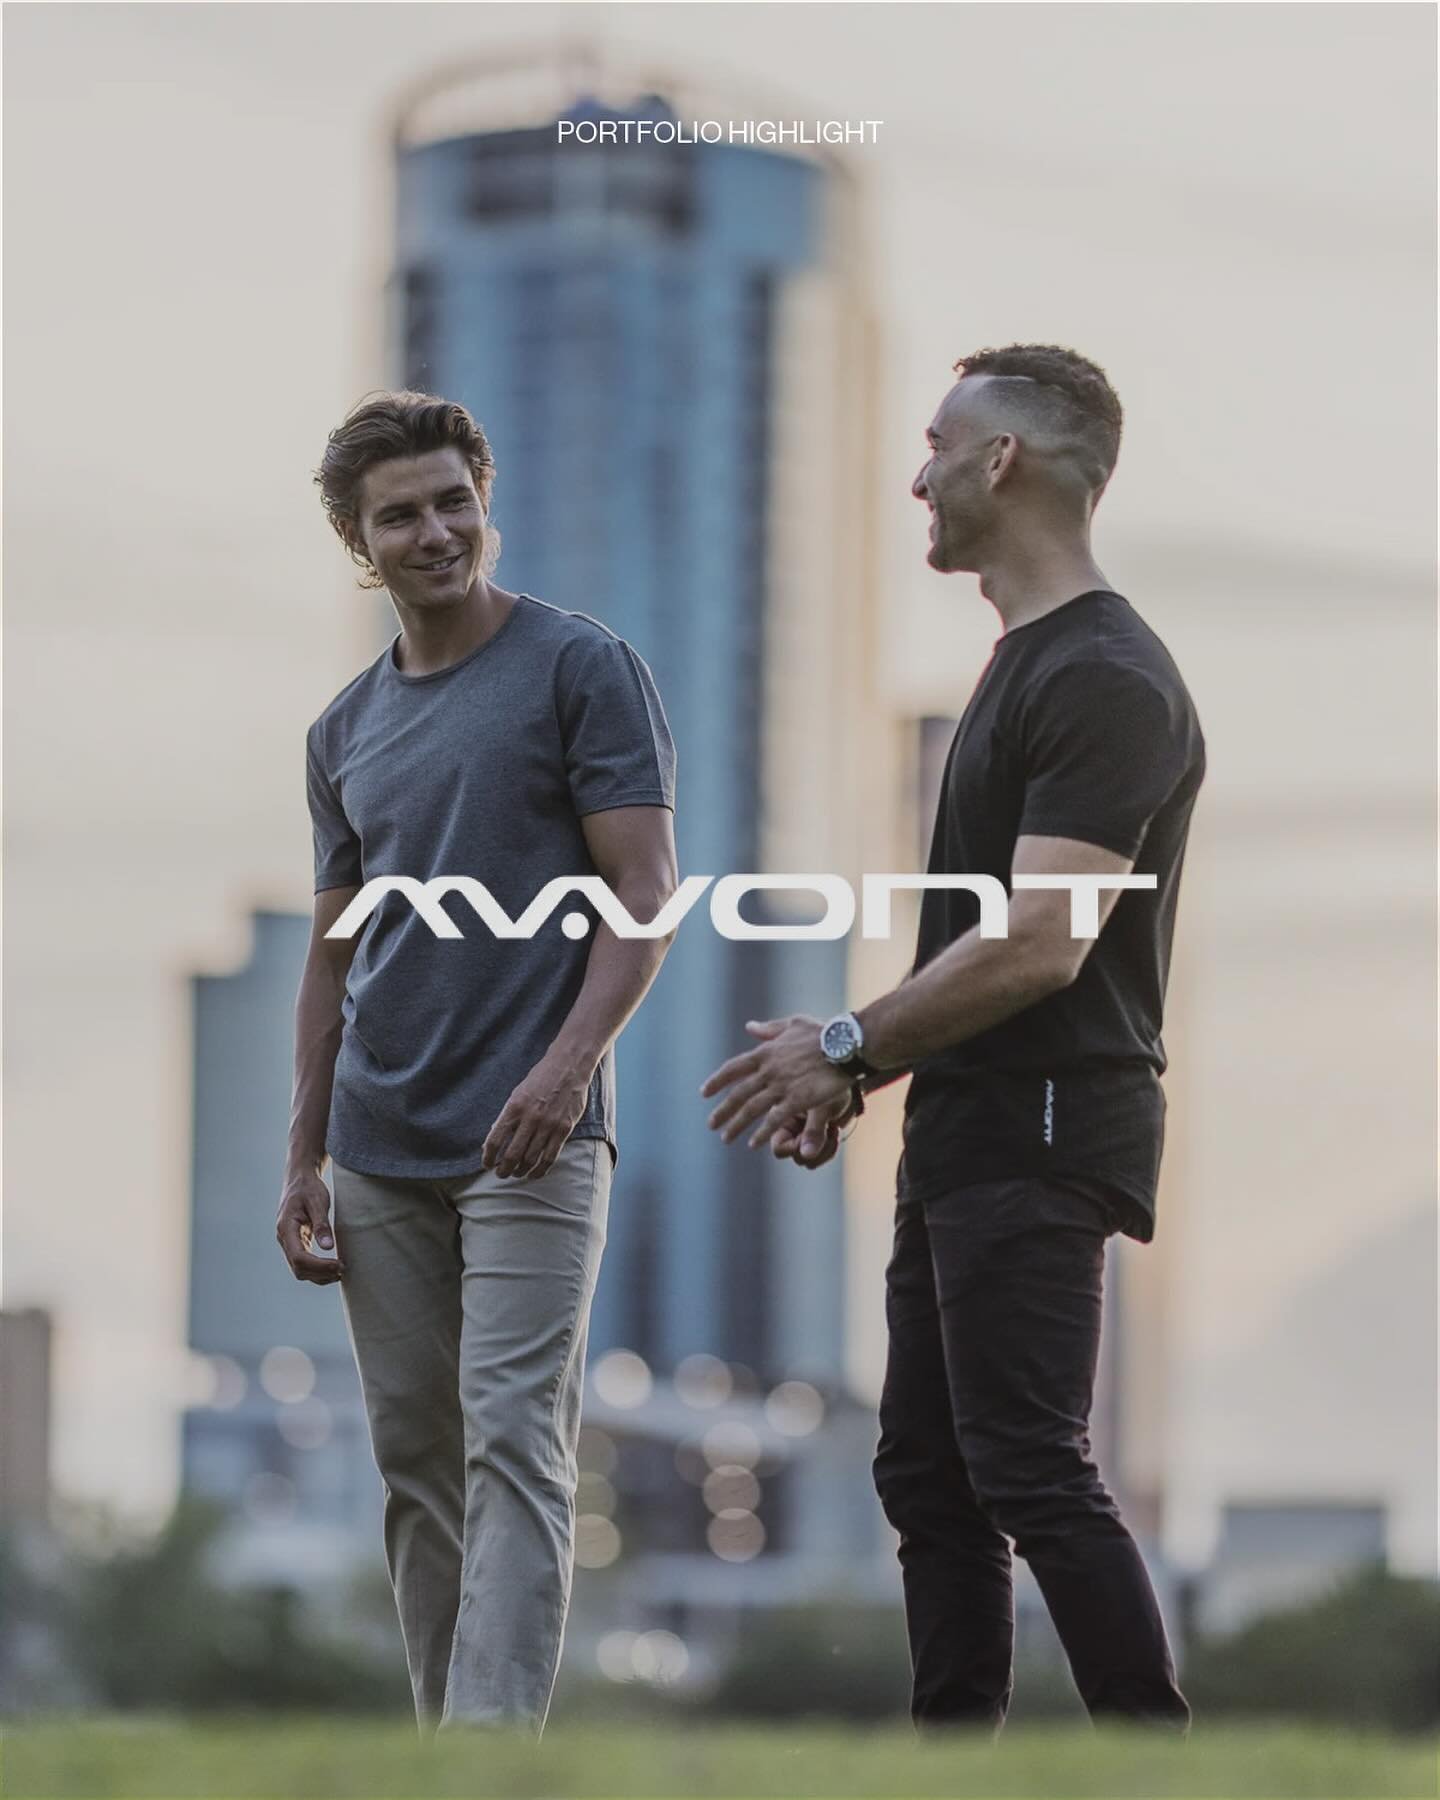 Where avant-garde meets savant. Experience unparalleled comfort and style with Mavont&rsquo;s exclusive modal blend at mavont.com